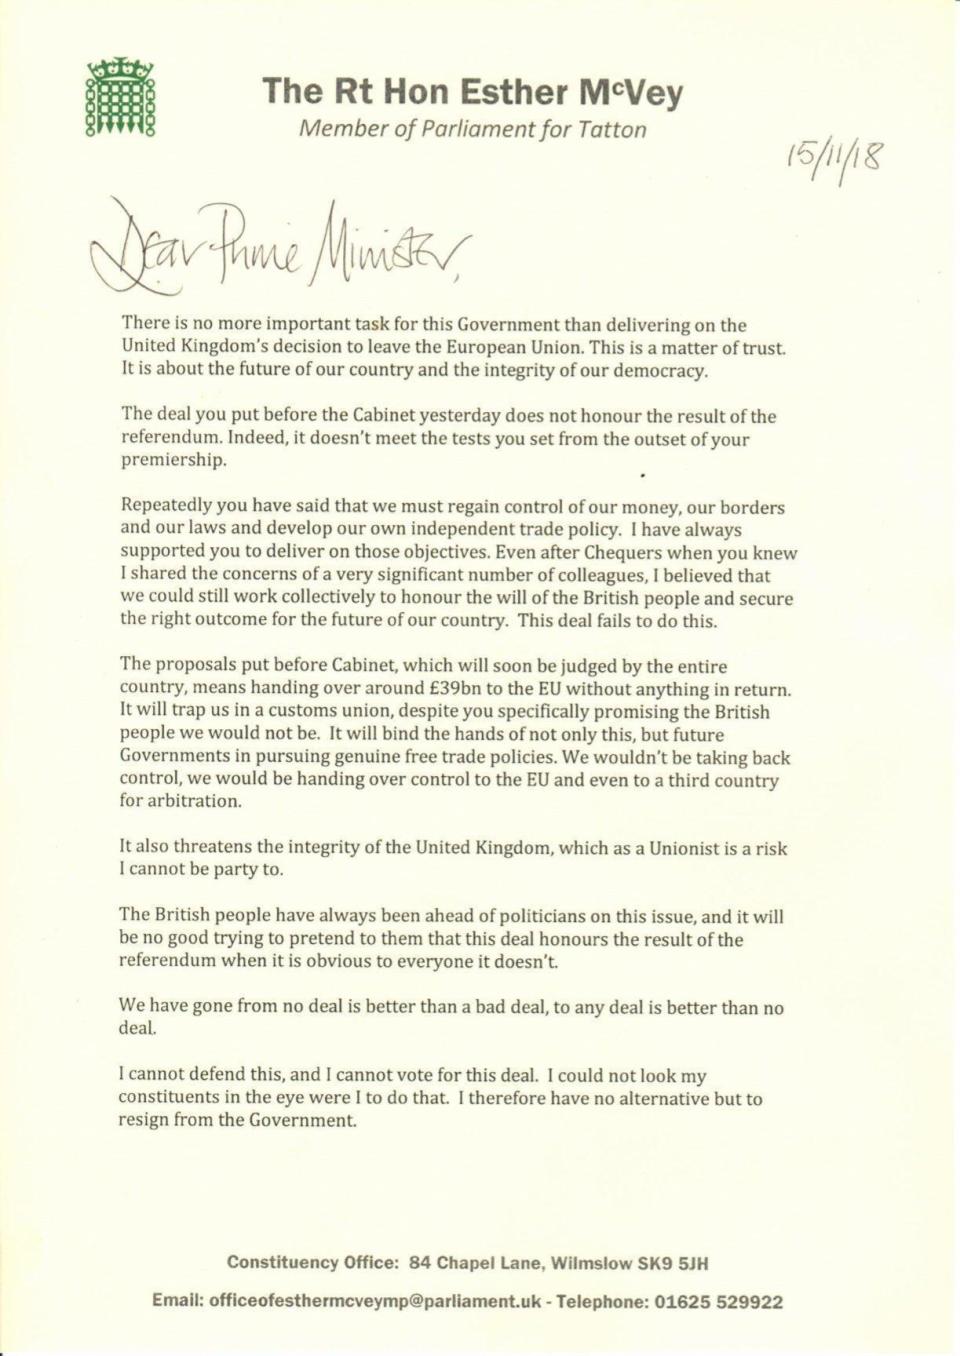 Esther McVey's letter to the Prime Minister